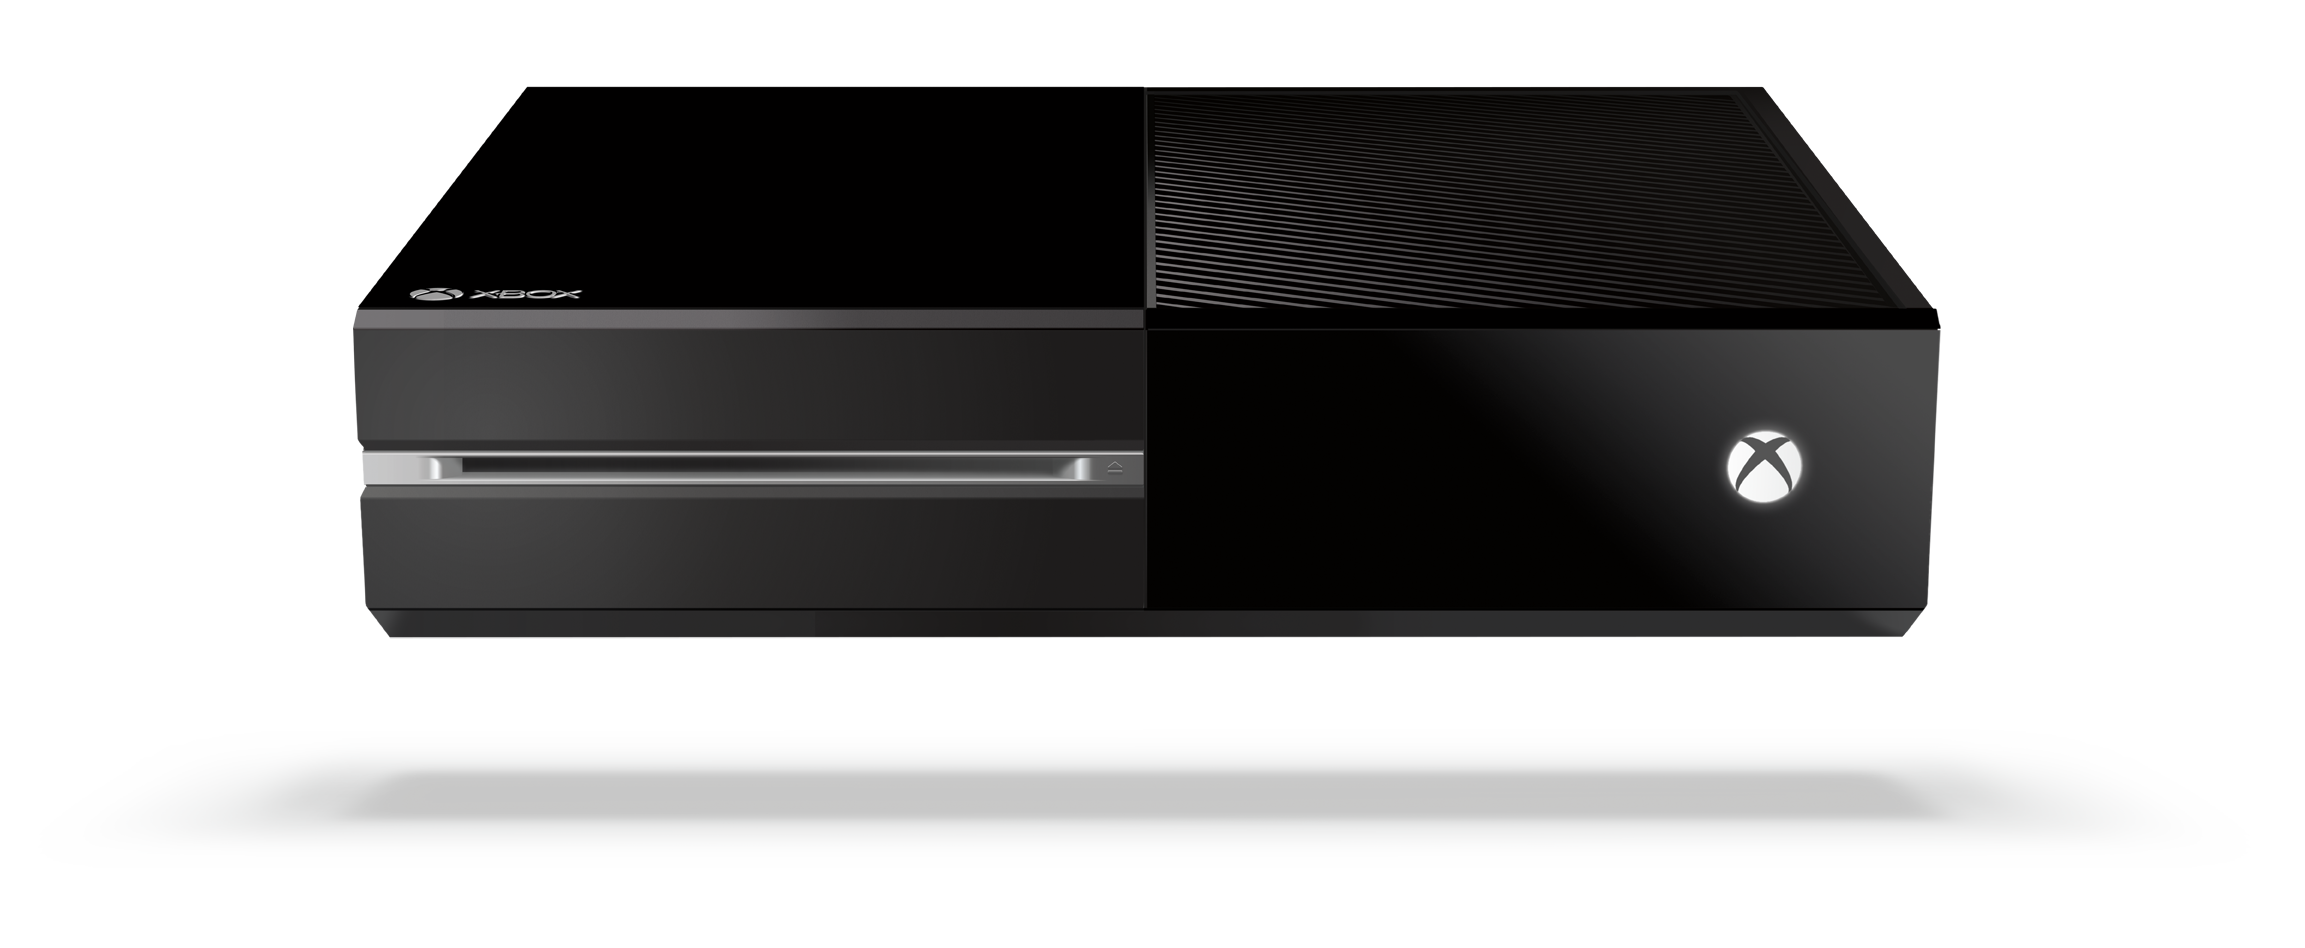 Xbox One – Reviewed | Gamer Living
